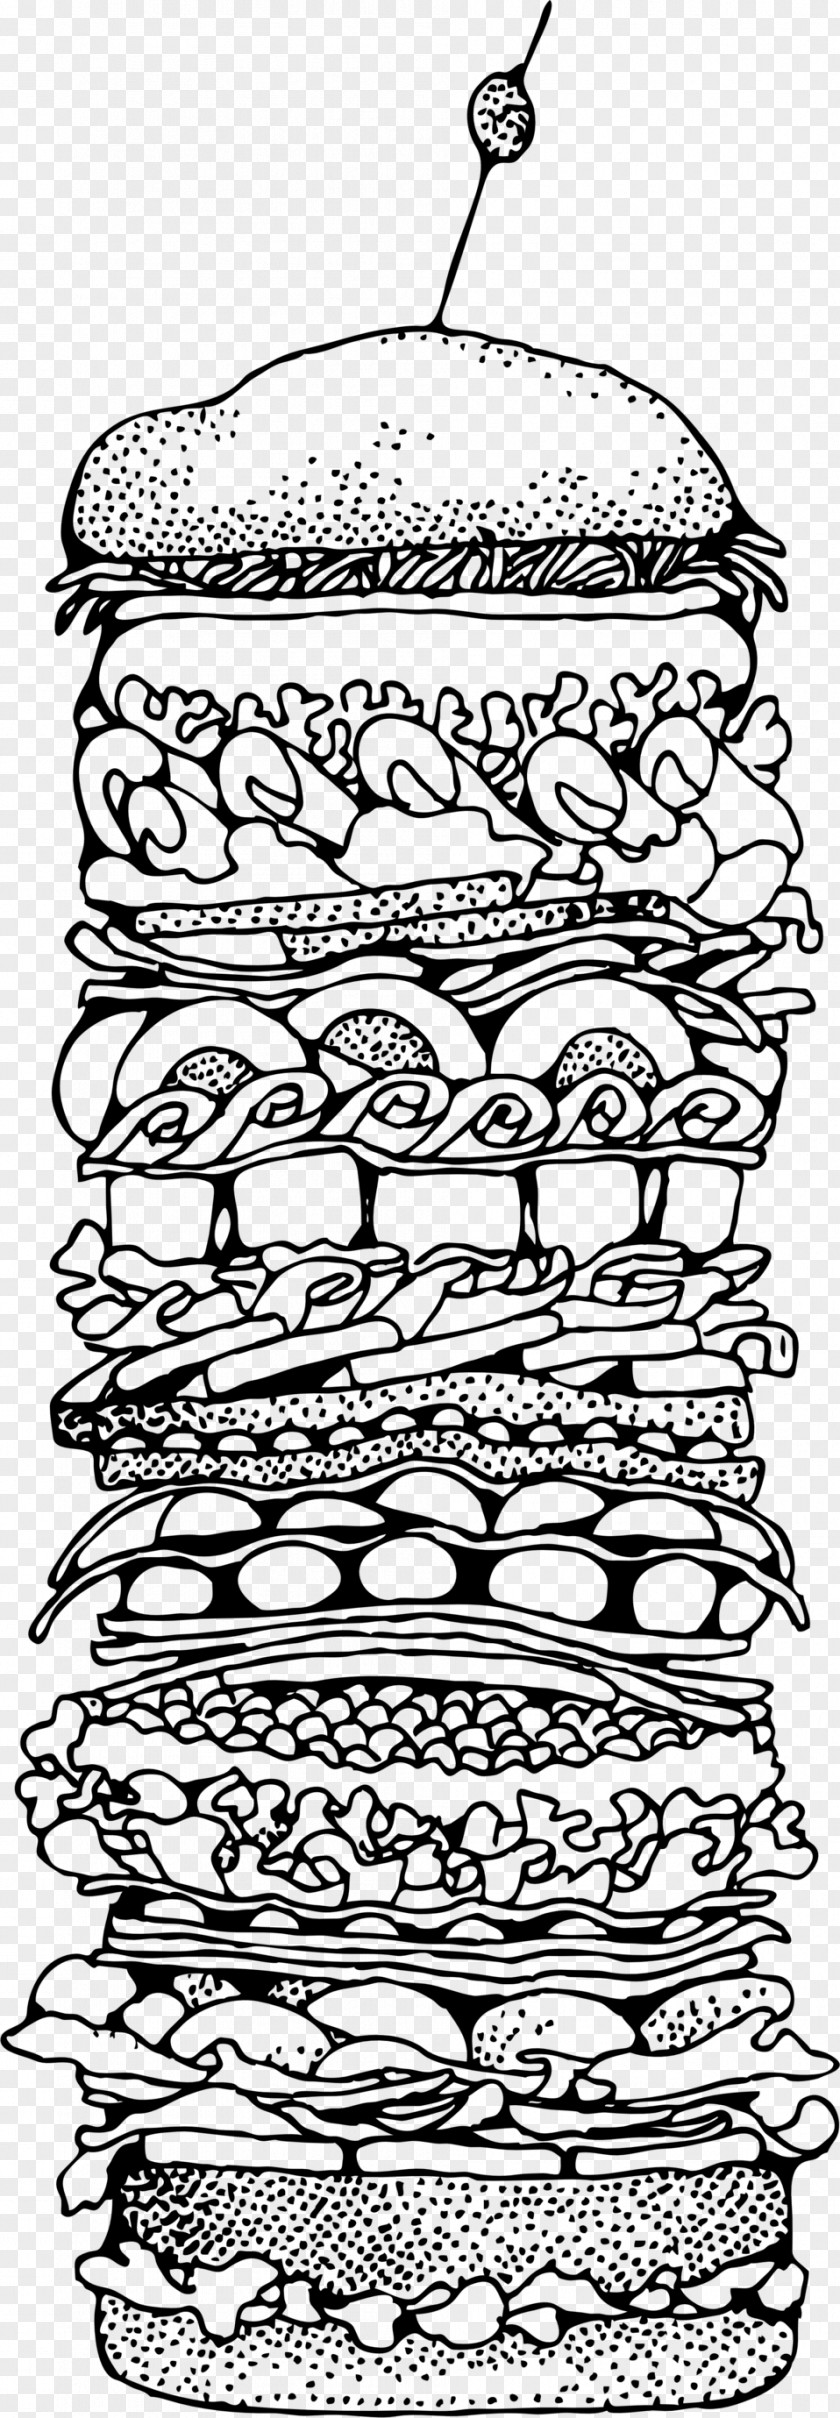 Sandwich Clipart Hamburger Peanut Butter And Jelly Submarine Clip Art PNG